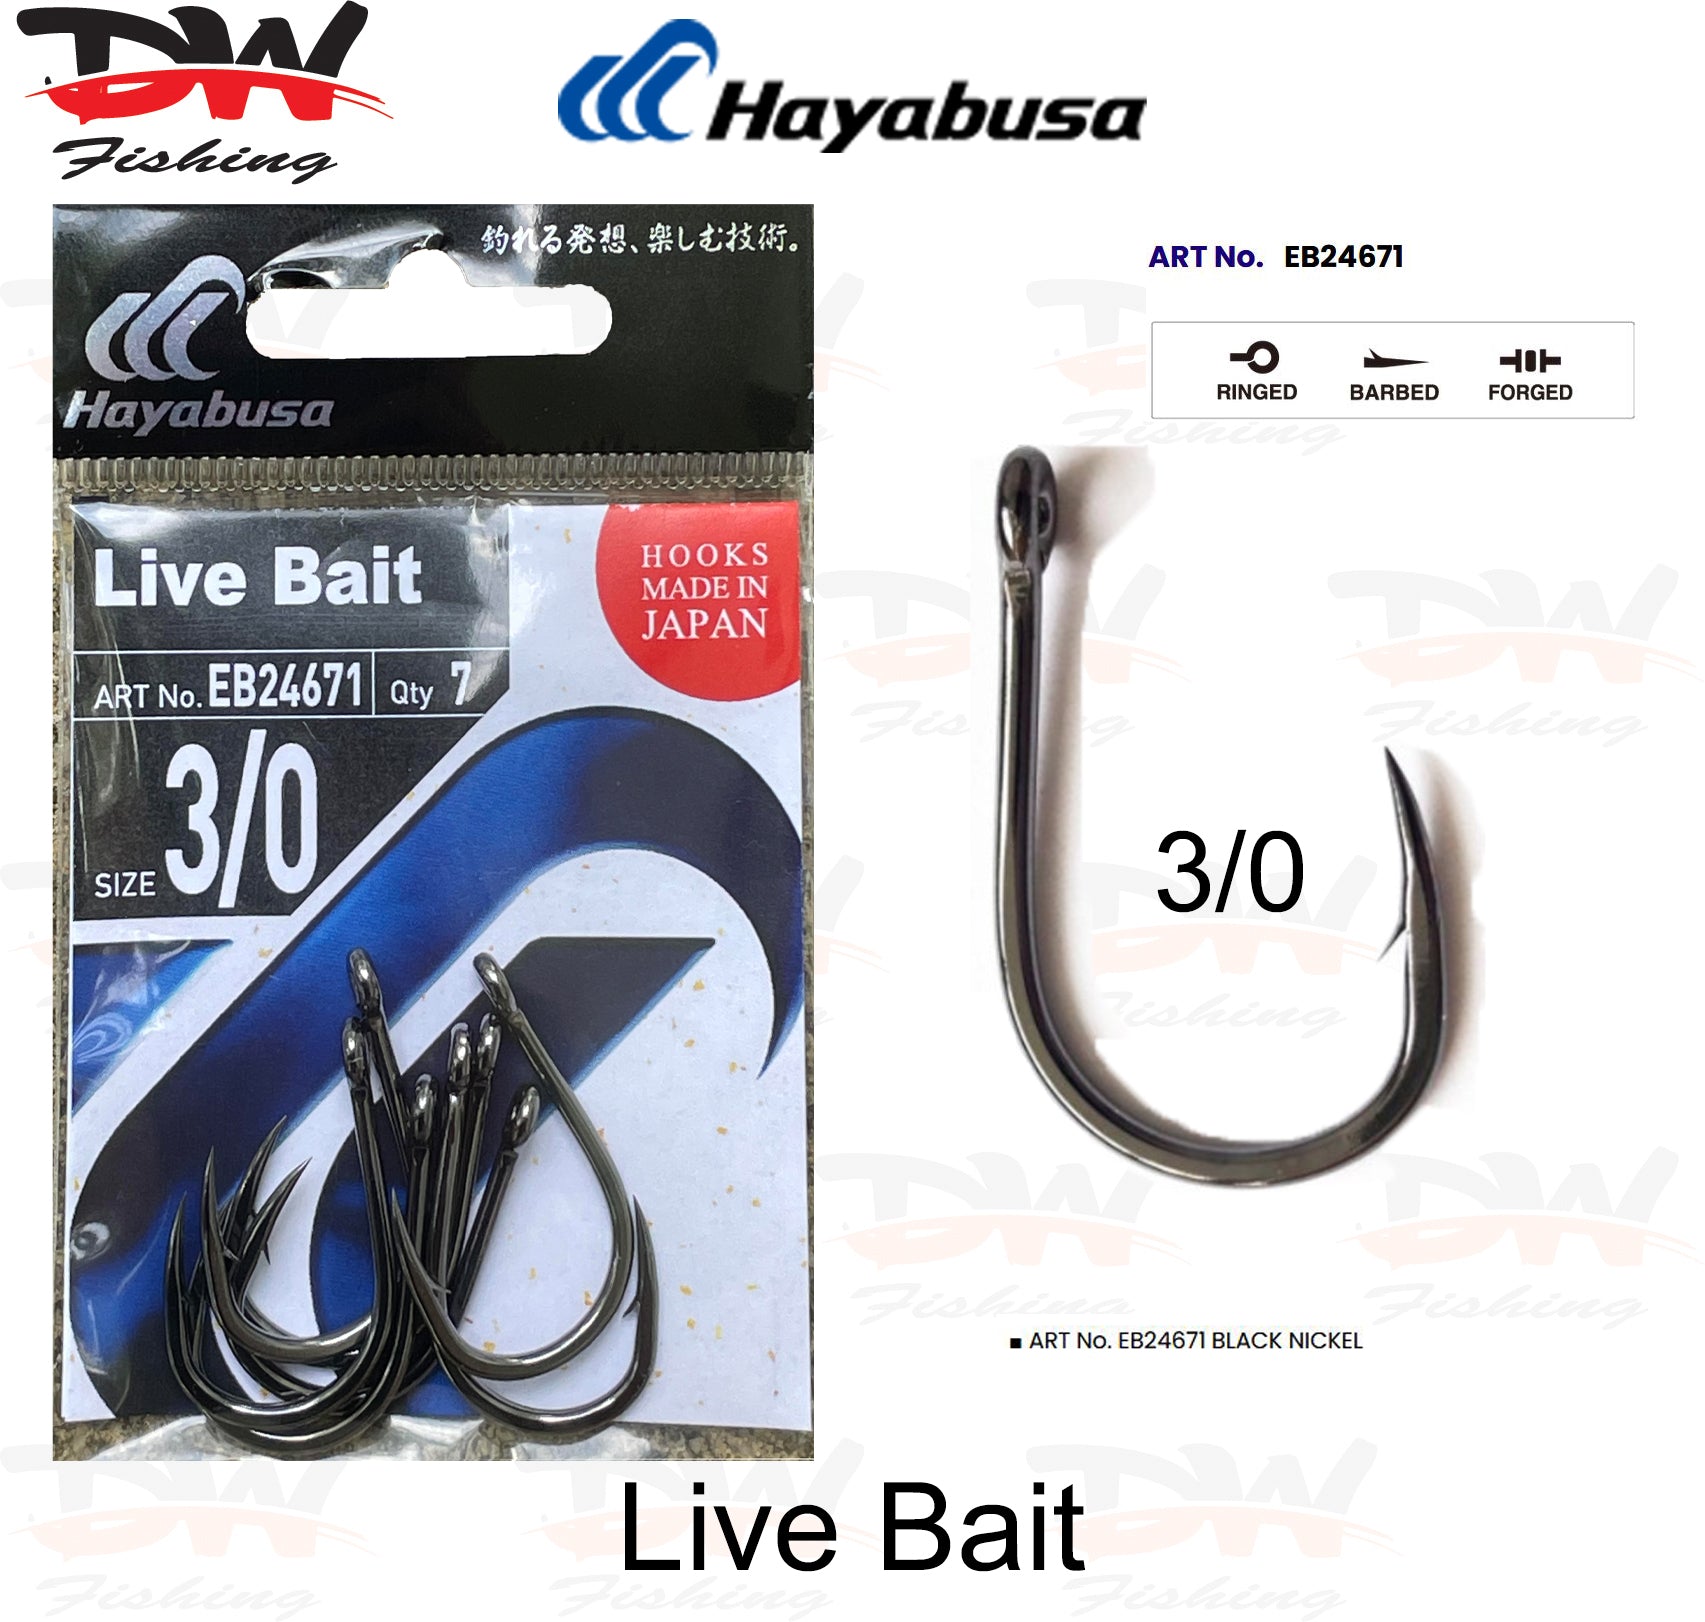 Hayabusa live bait hook H.LBT246 size 3-0 with pack and hook displayed